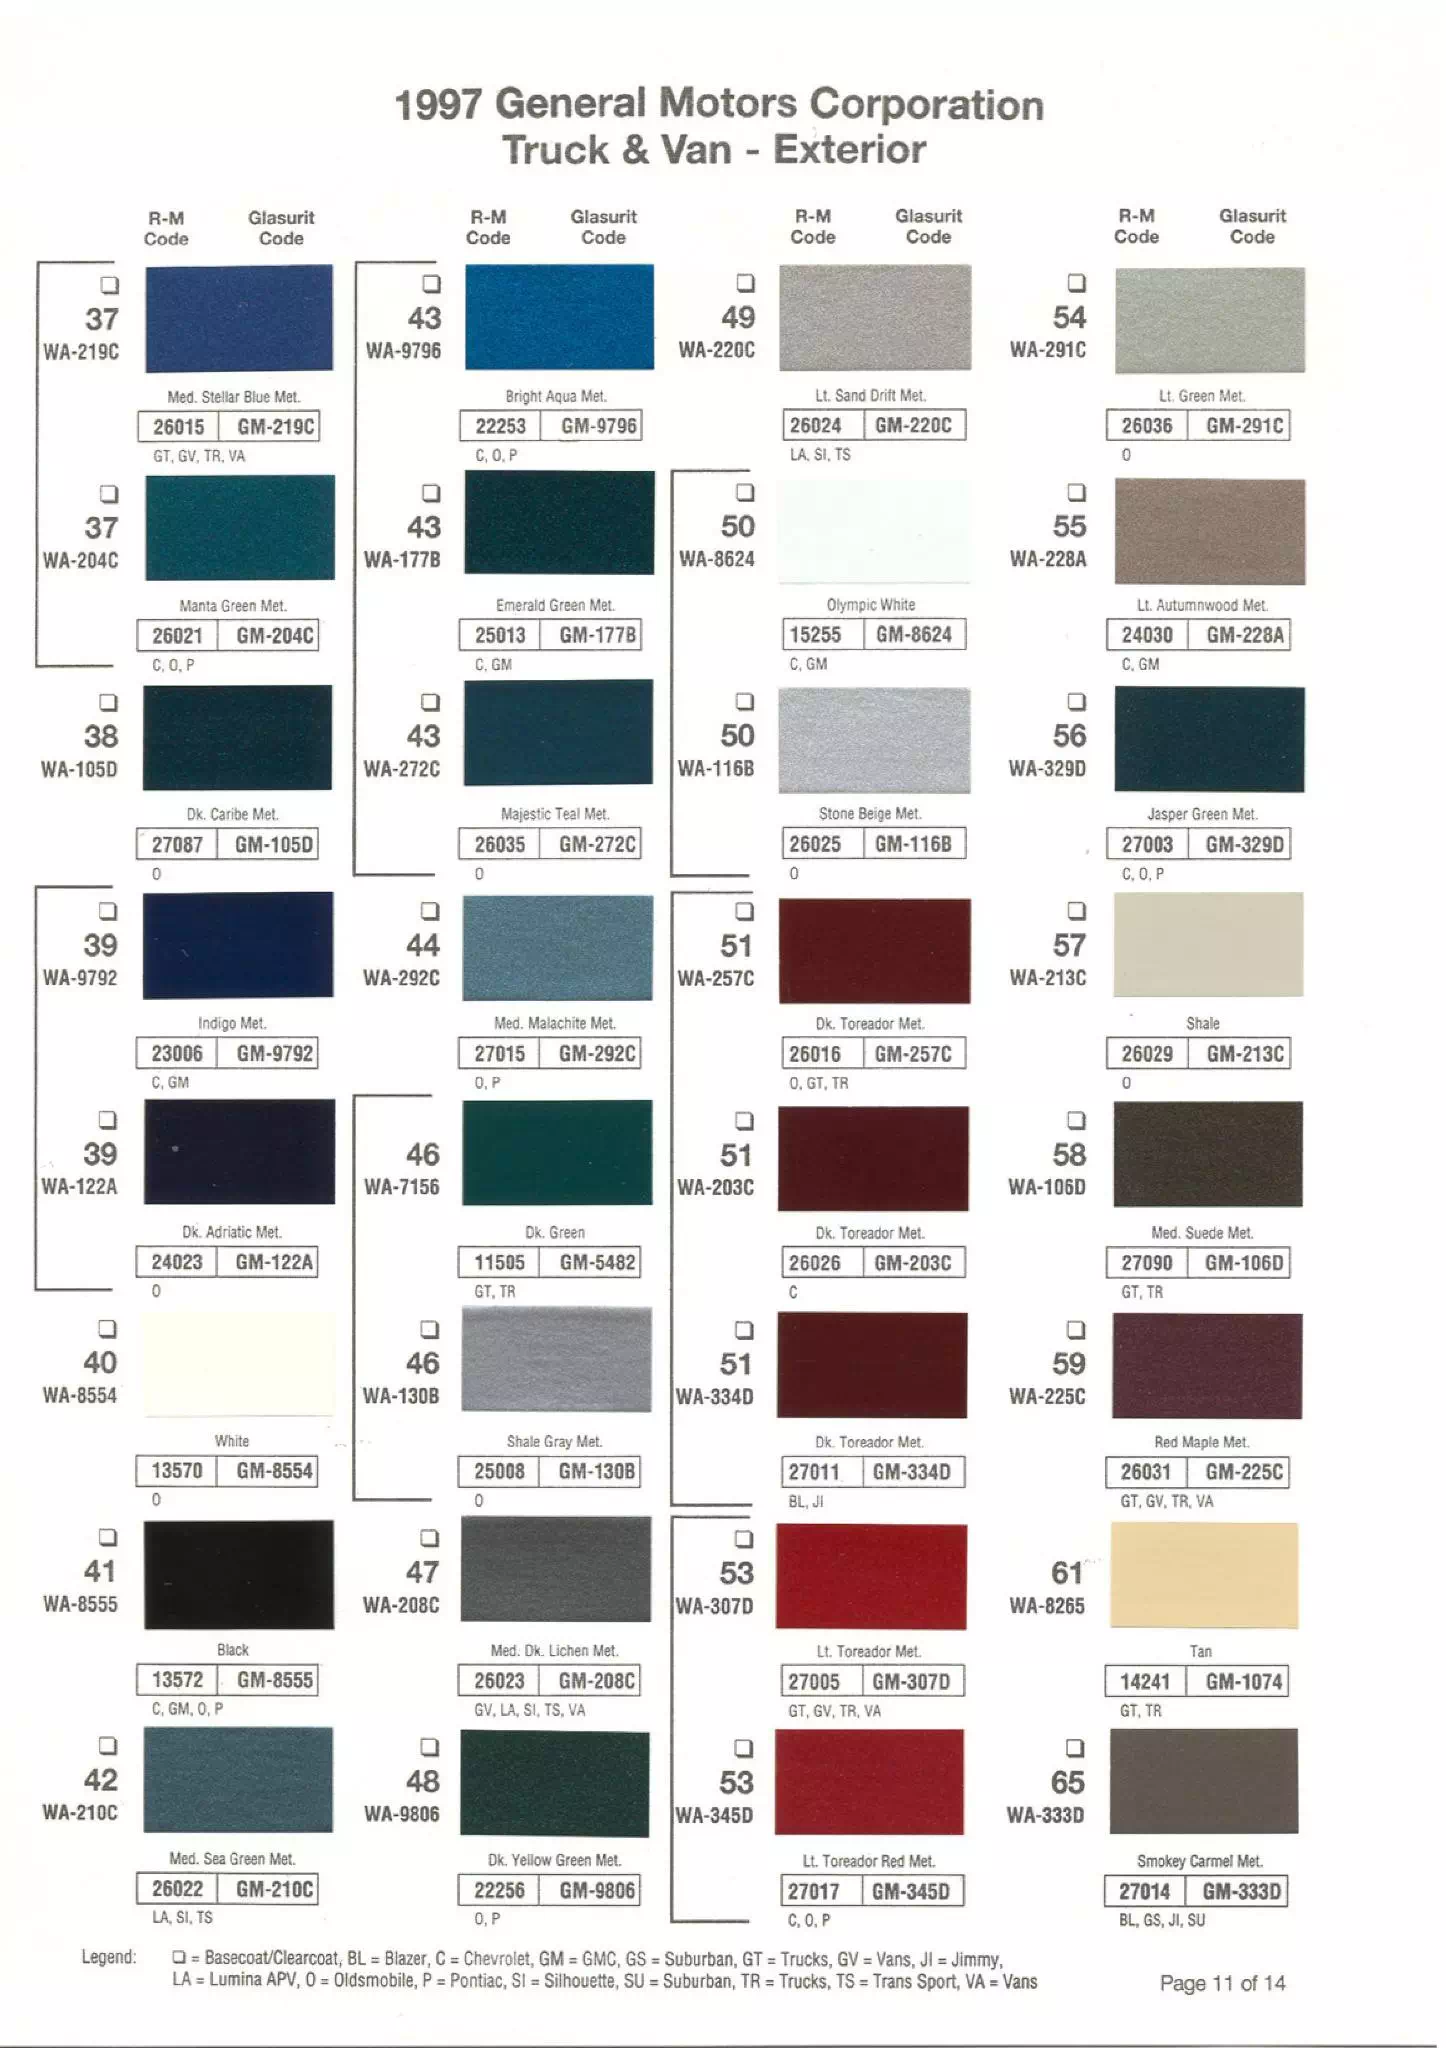 Paint Codes and Color Examples for 1997 Chevrolet, Cadillac, Buick, GMC, Oldsmobile, Pontiac & Saturn Vehicles.